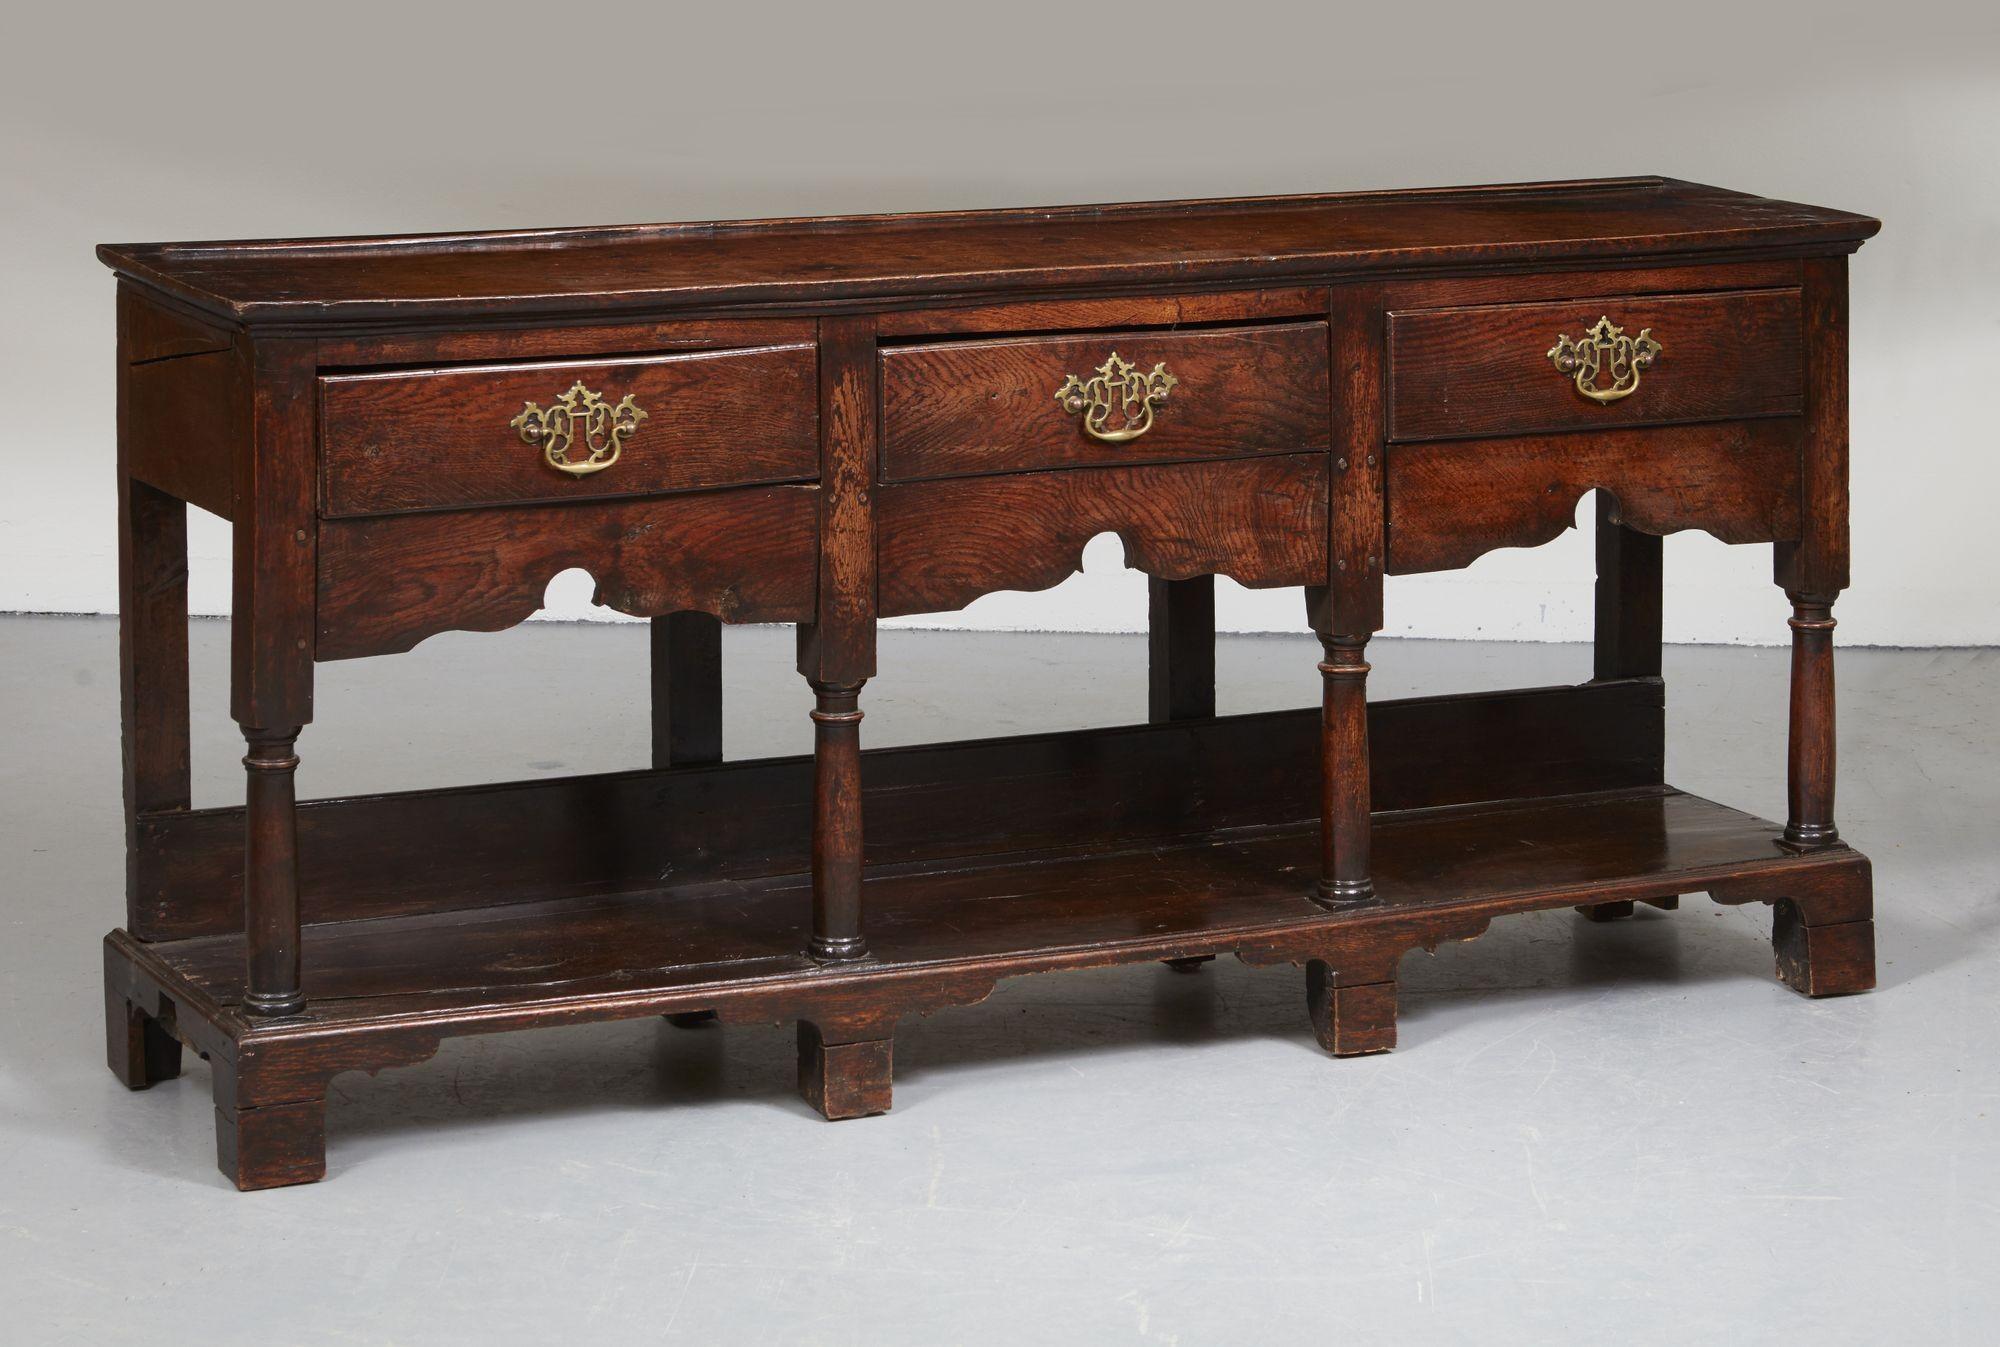 An 18th century English oak low dresser having three drawers with scalloped apron and column turned legs over potboard shelf. Desirable small proportions, elegant form and wonderful patina.